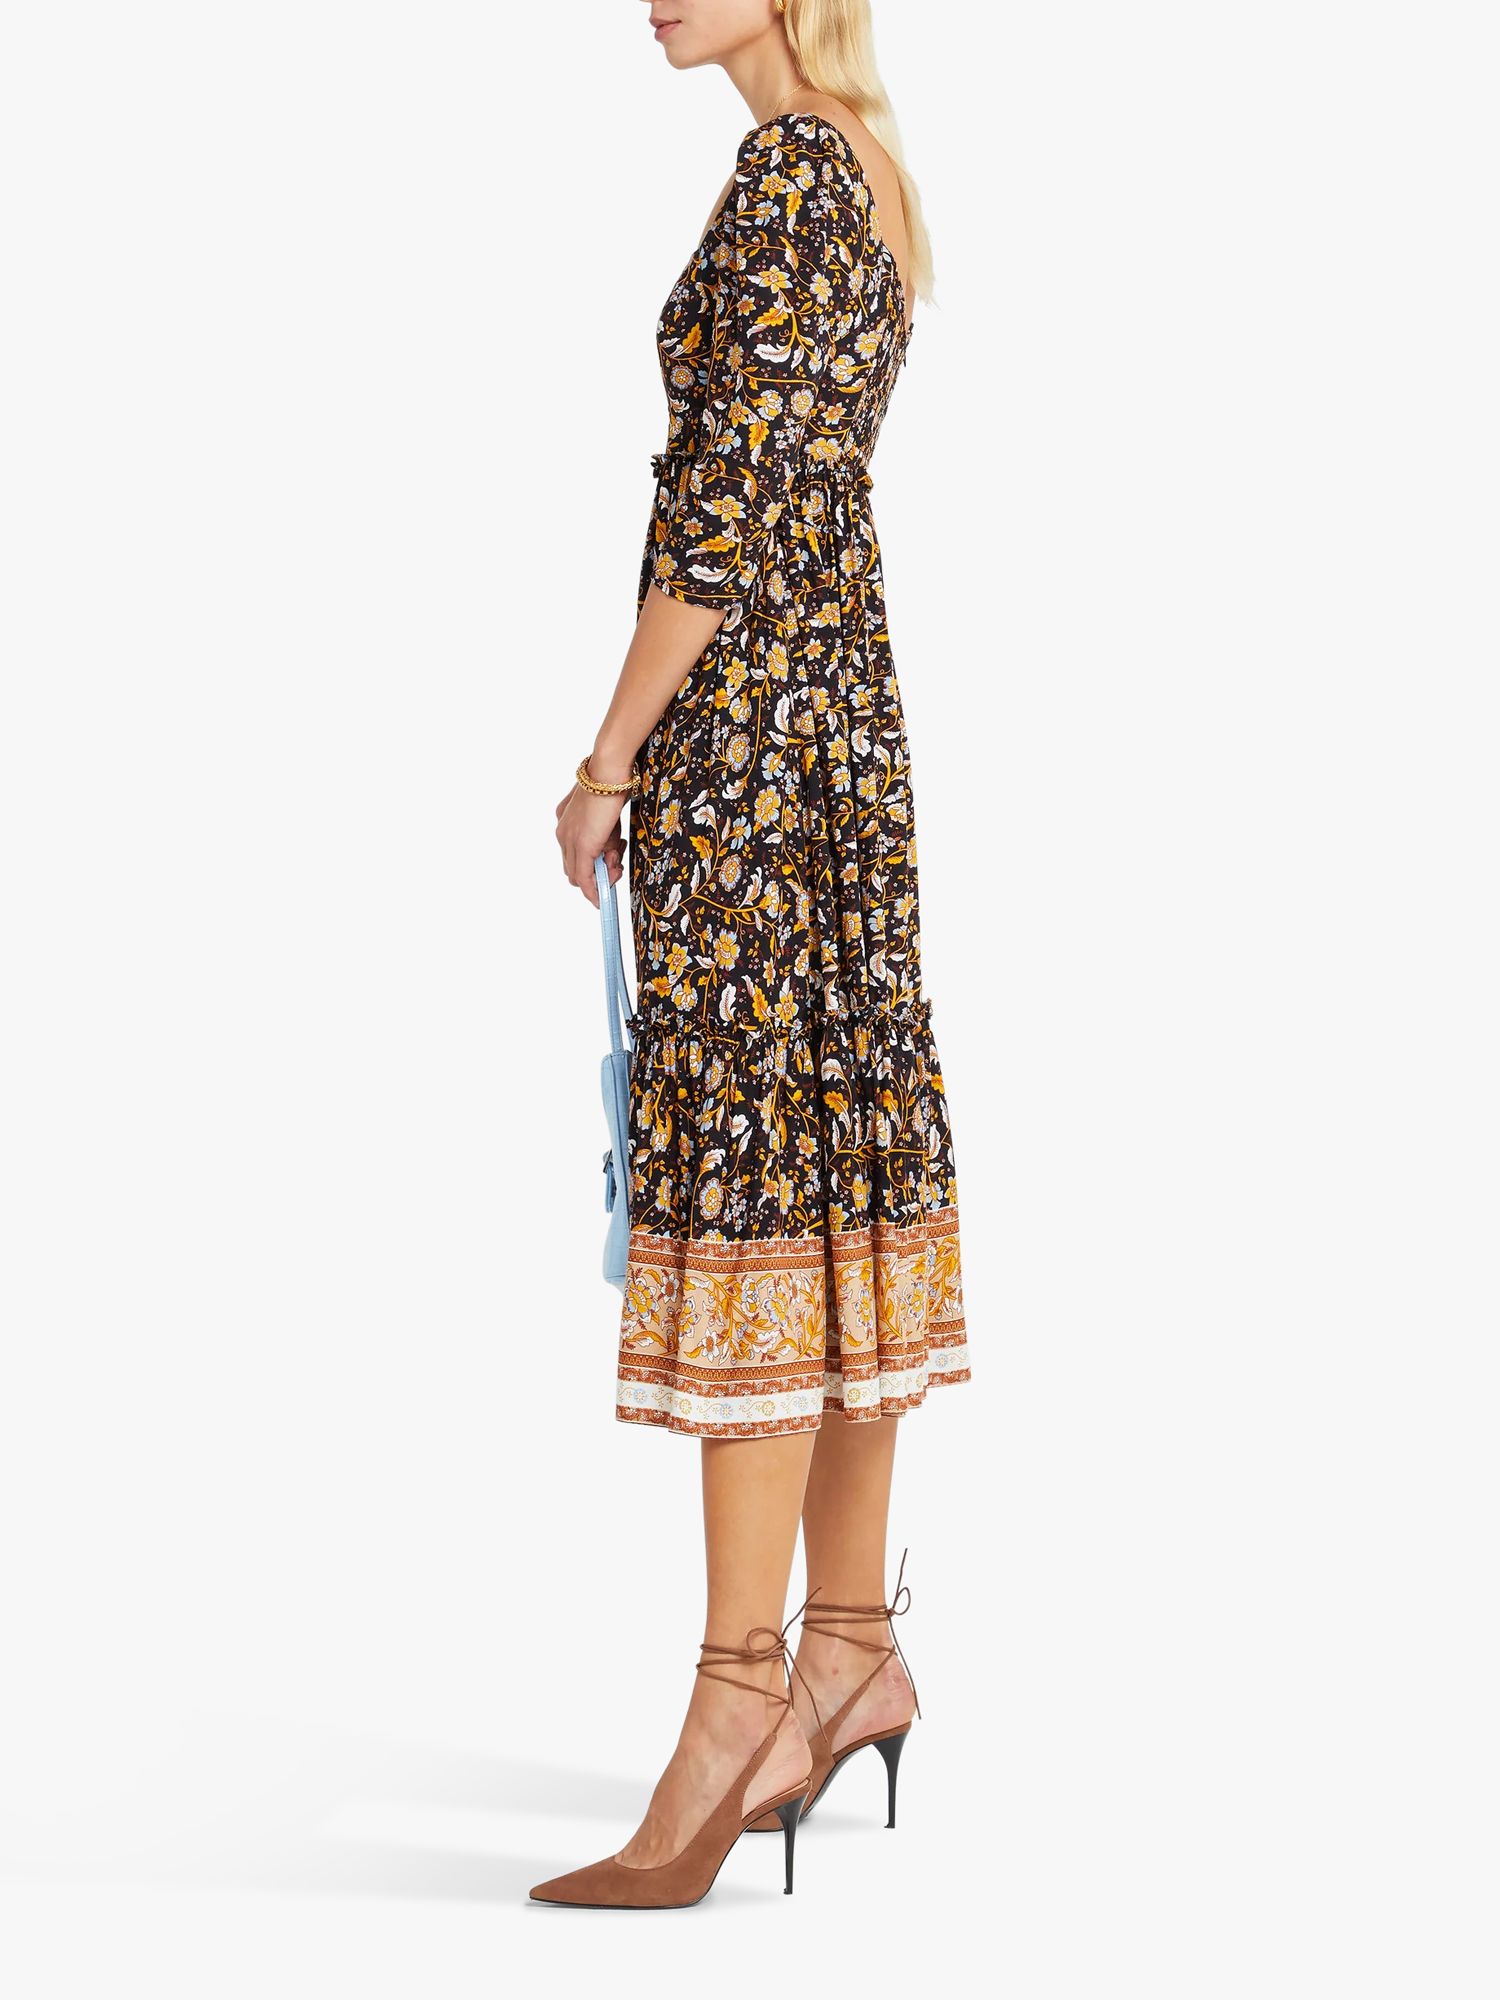 o.p.t Willow Midi Dress, Brown Floral, S